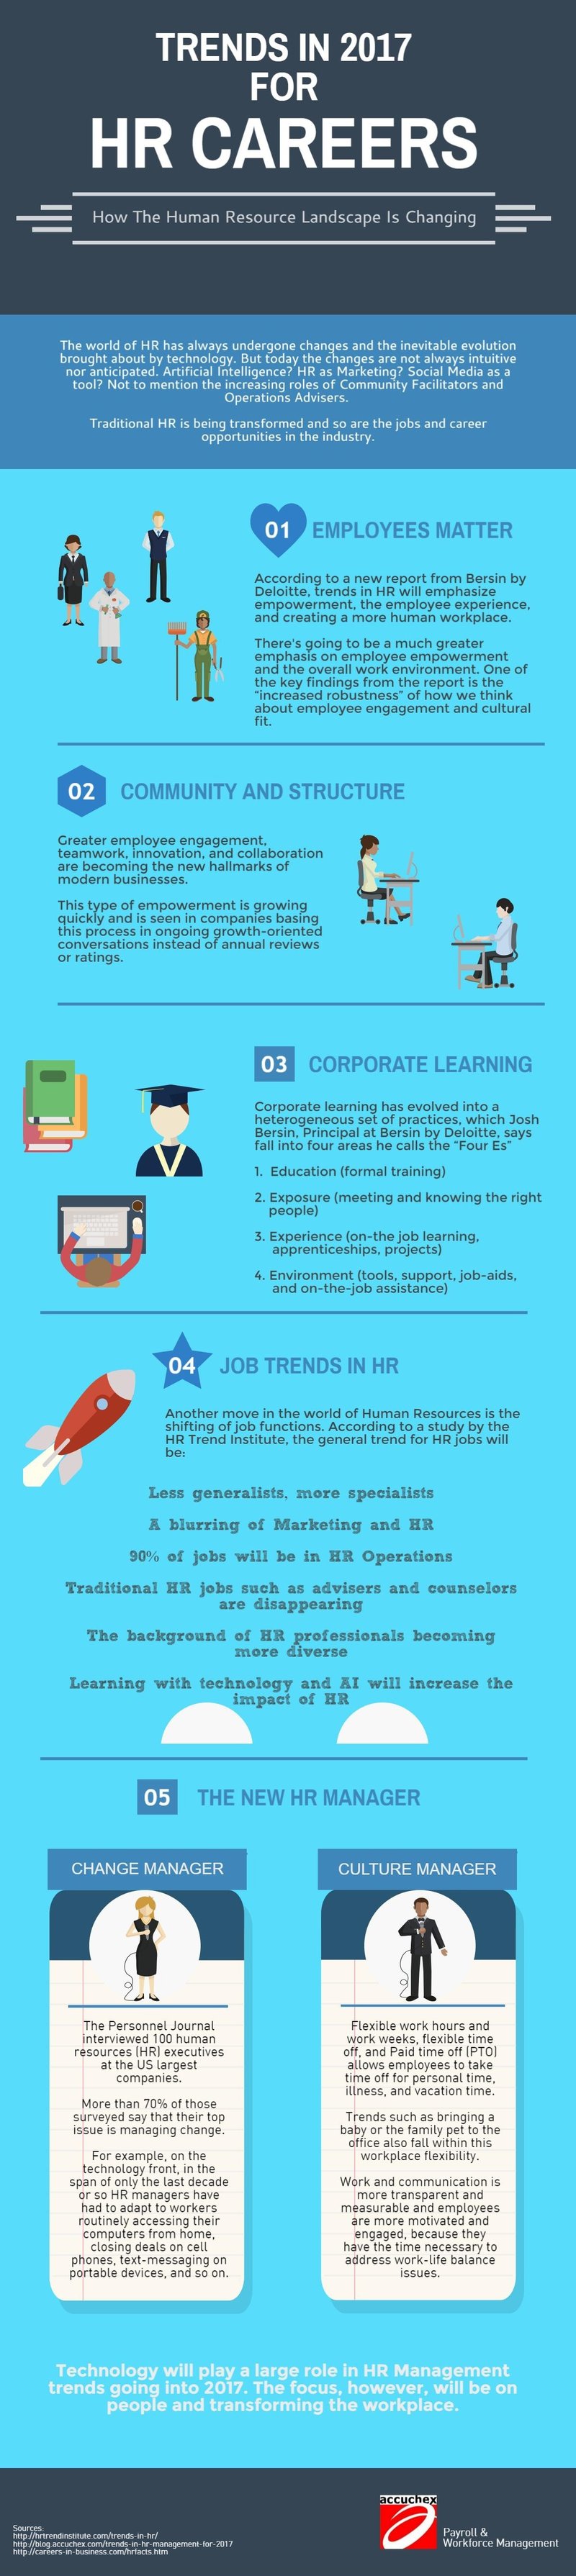 trends-in-hr-management-in-2017-infographic